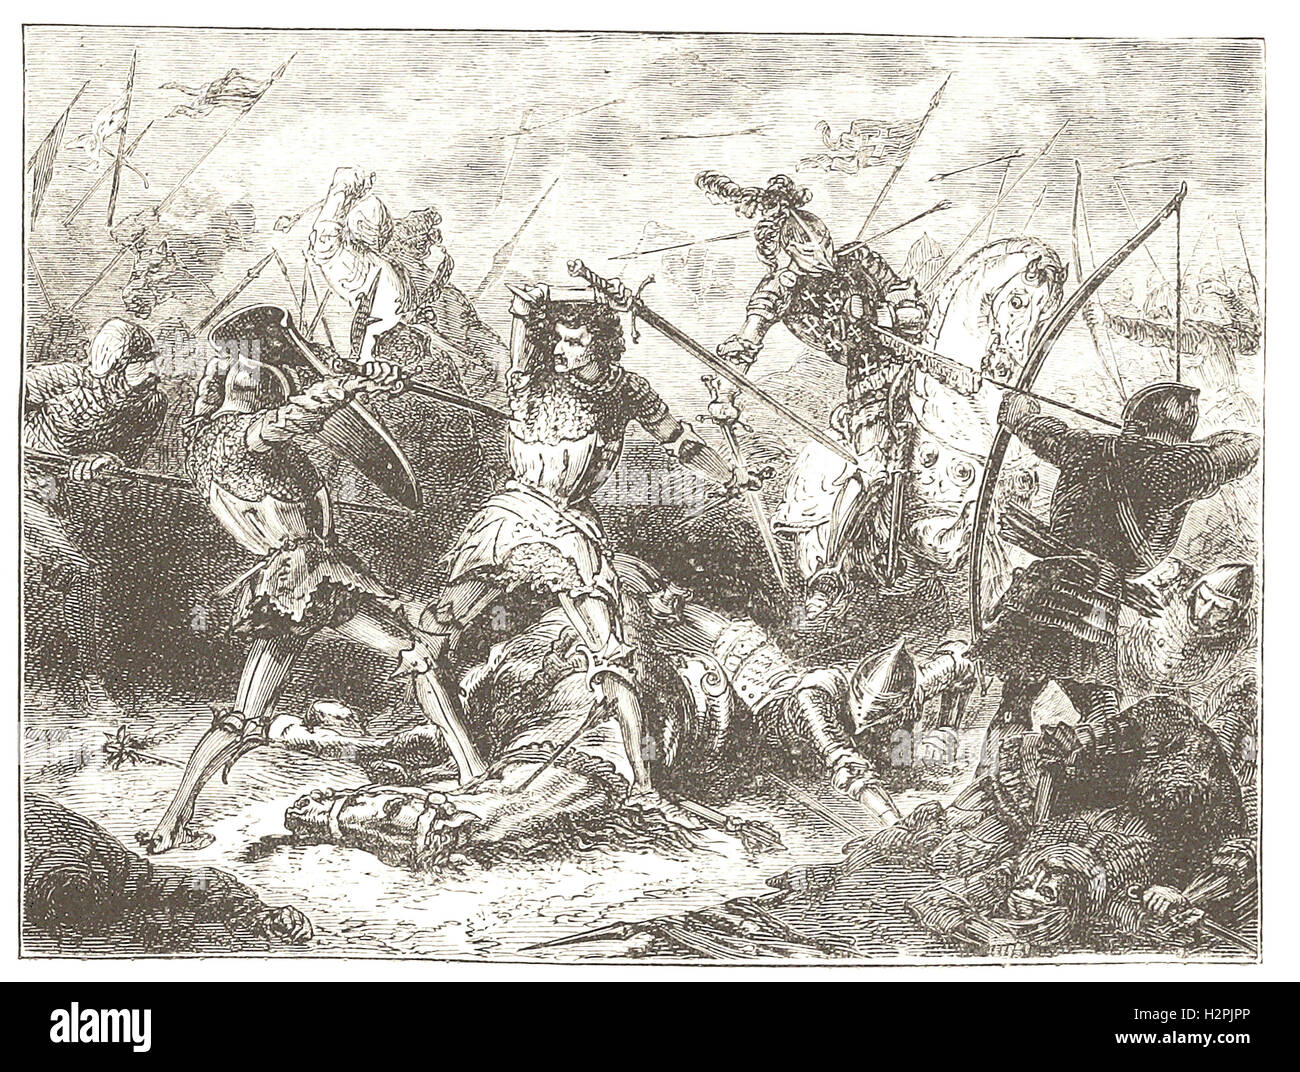 THE BATTLE OF ACINCOURT.- from 'Cassell's Illustrated Universal History' - 1882 Stock Photo